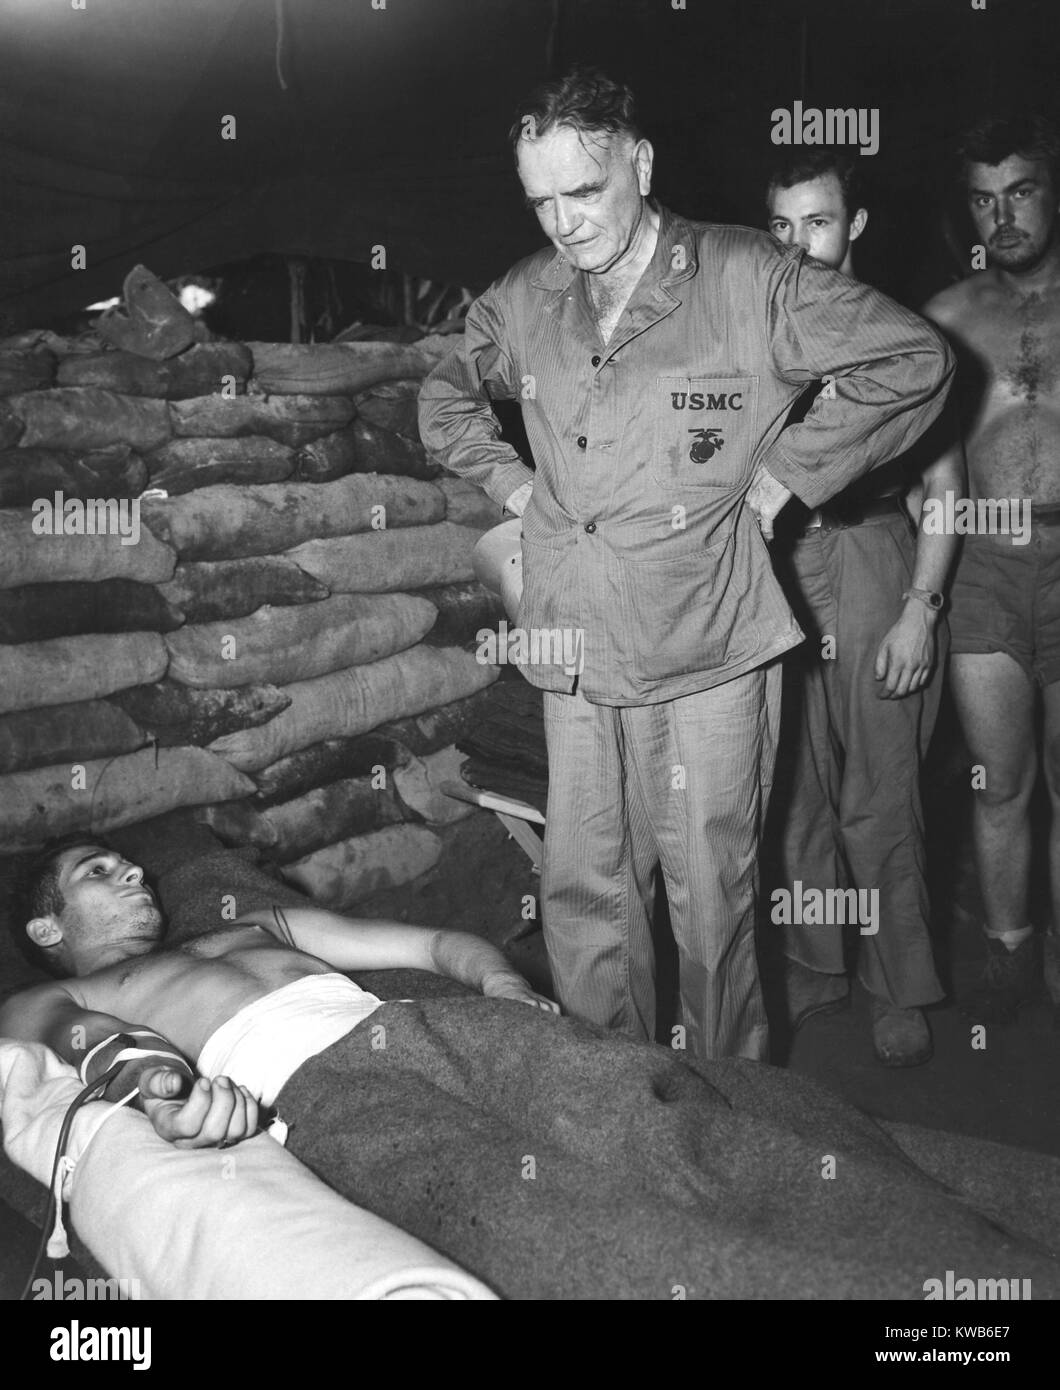 Admiral William Halsey visiting a sandbagged hospital dugout at Bougainville. The soldier is receiving a saline injection after an appendectomy in South Pacific during World War 2. Ca. 1943-44 (BSLOC 2014 8 125) Stock Photo